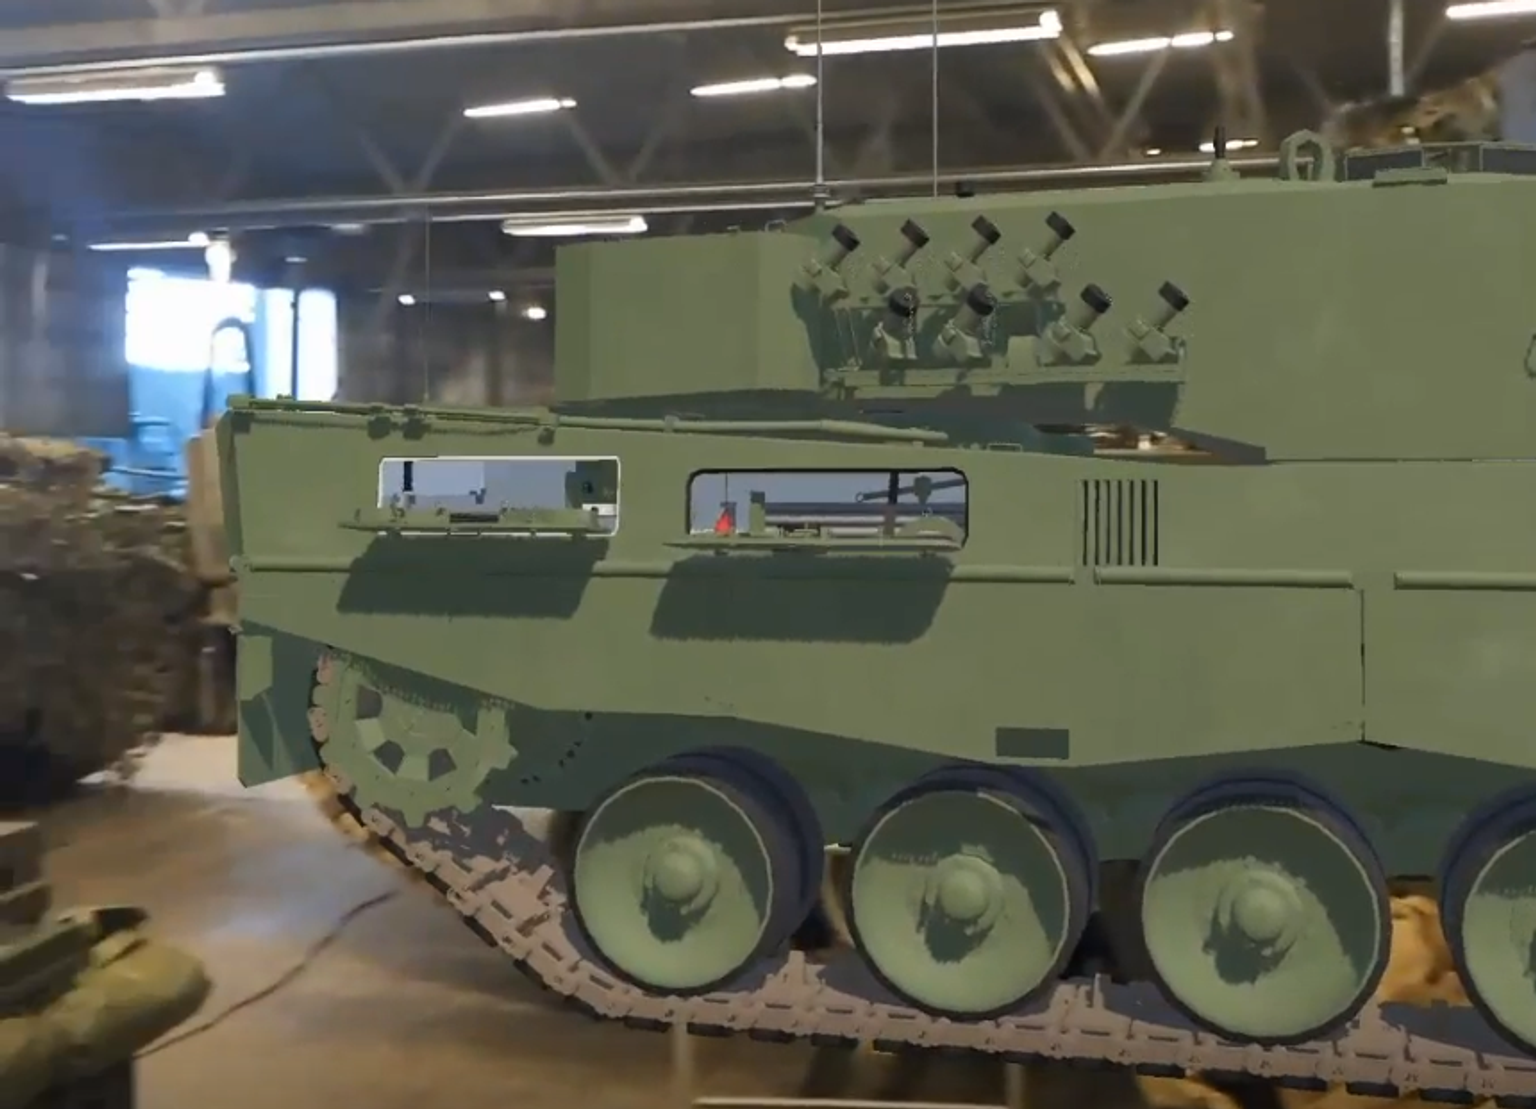 We used the AR-headset Magic Leap to align the digital twin to the real tank